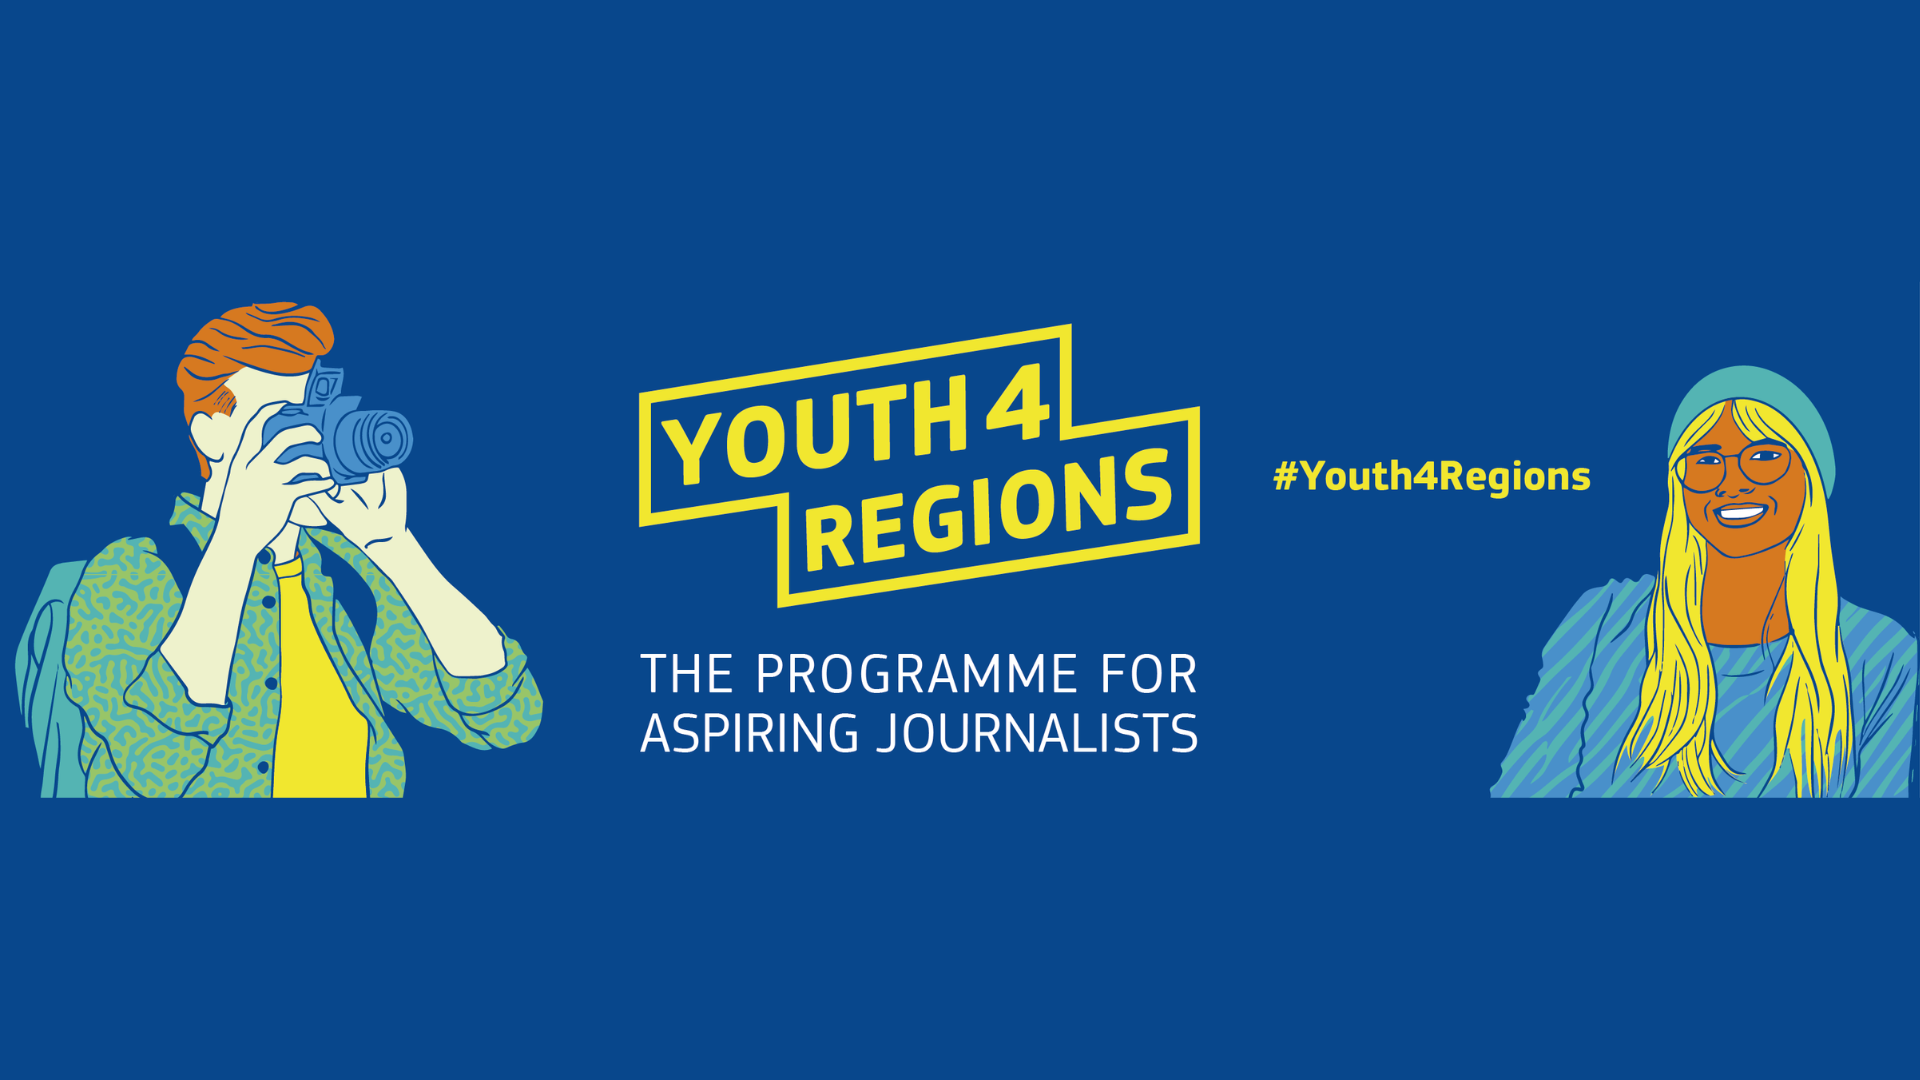 APPLY NOW: Youth4Regions, the programme for aspiring journalists